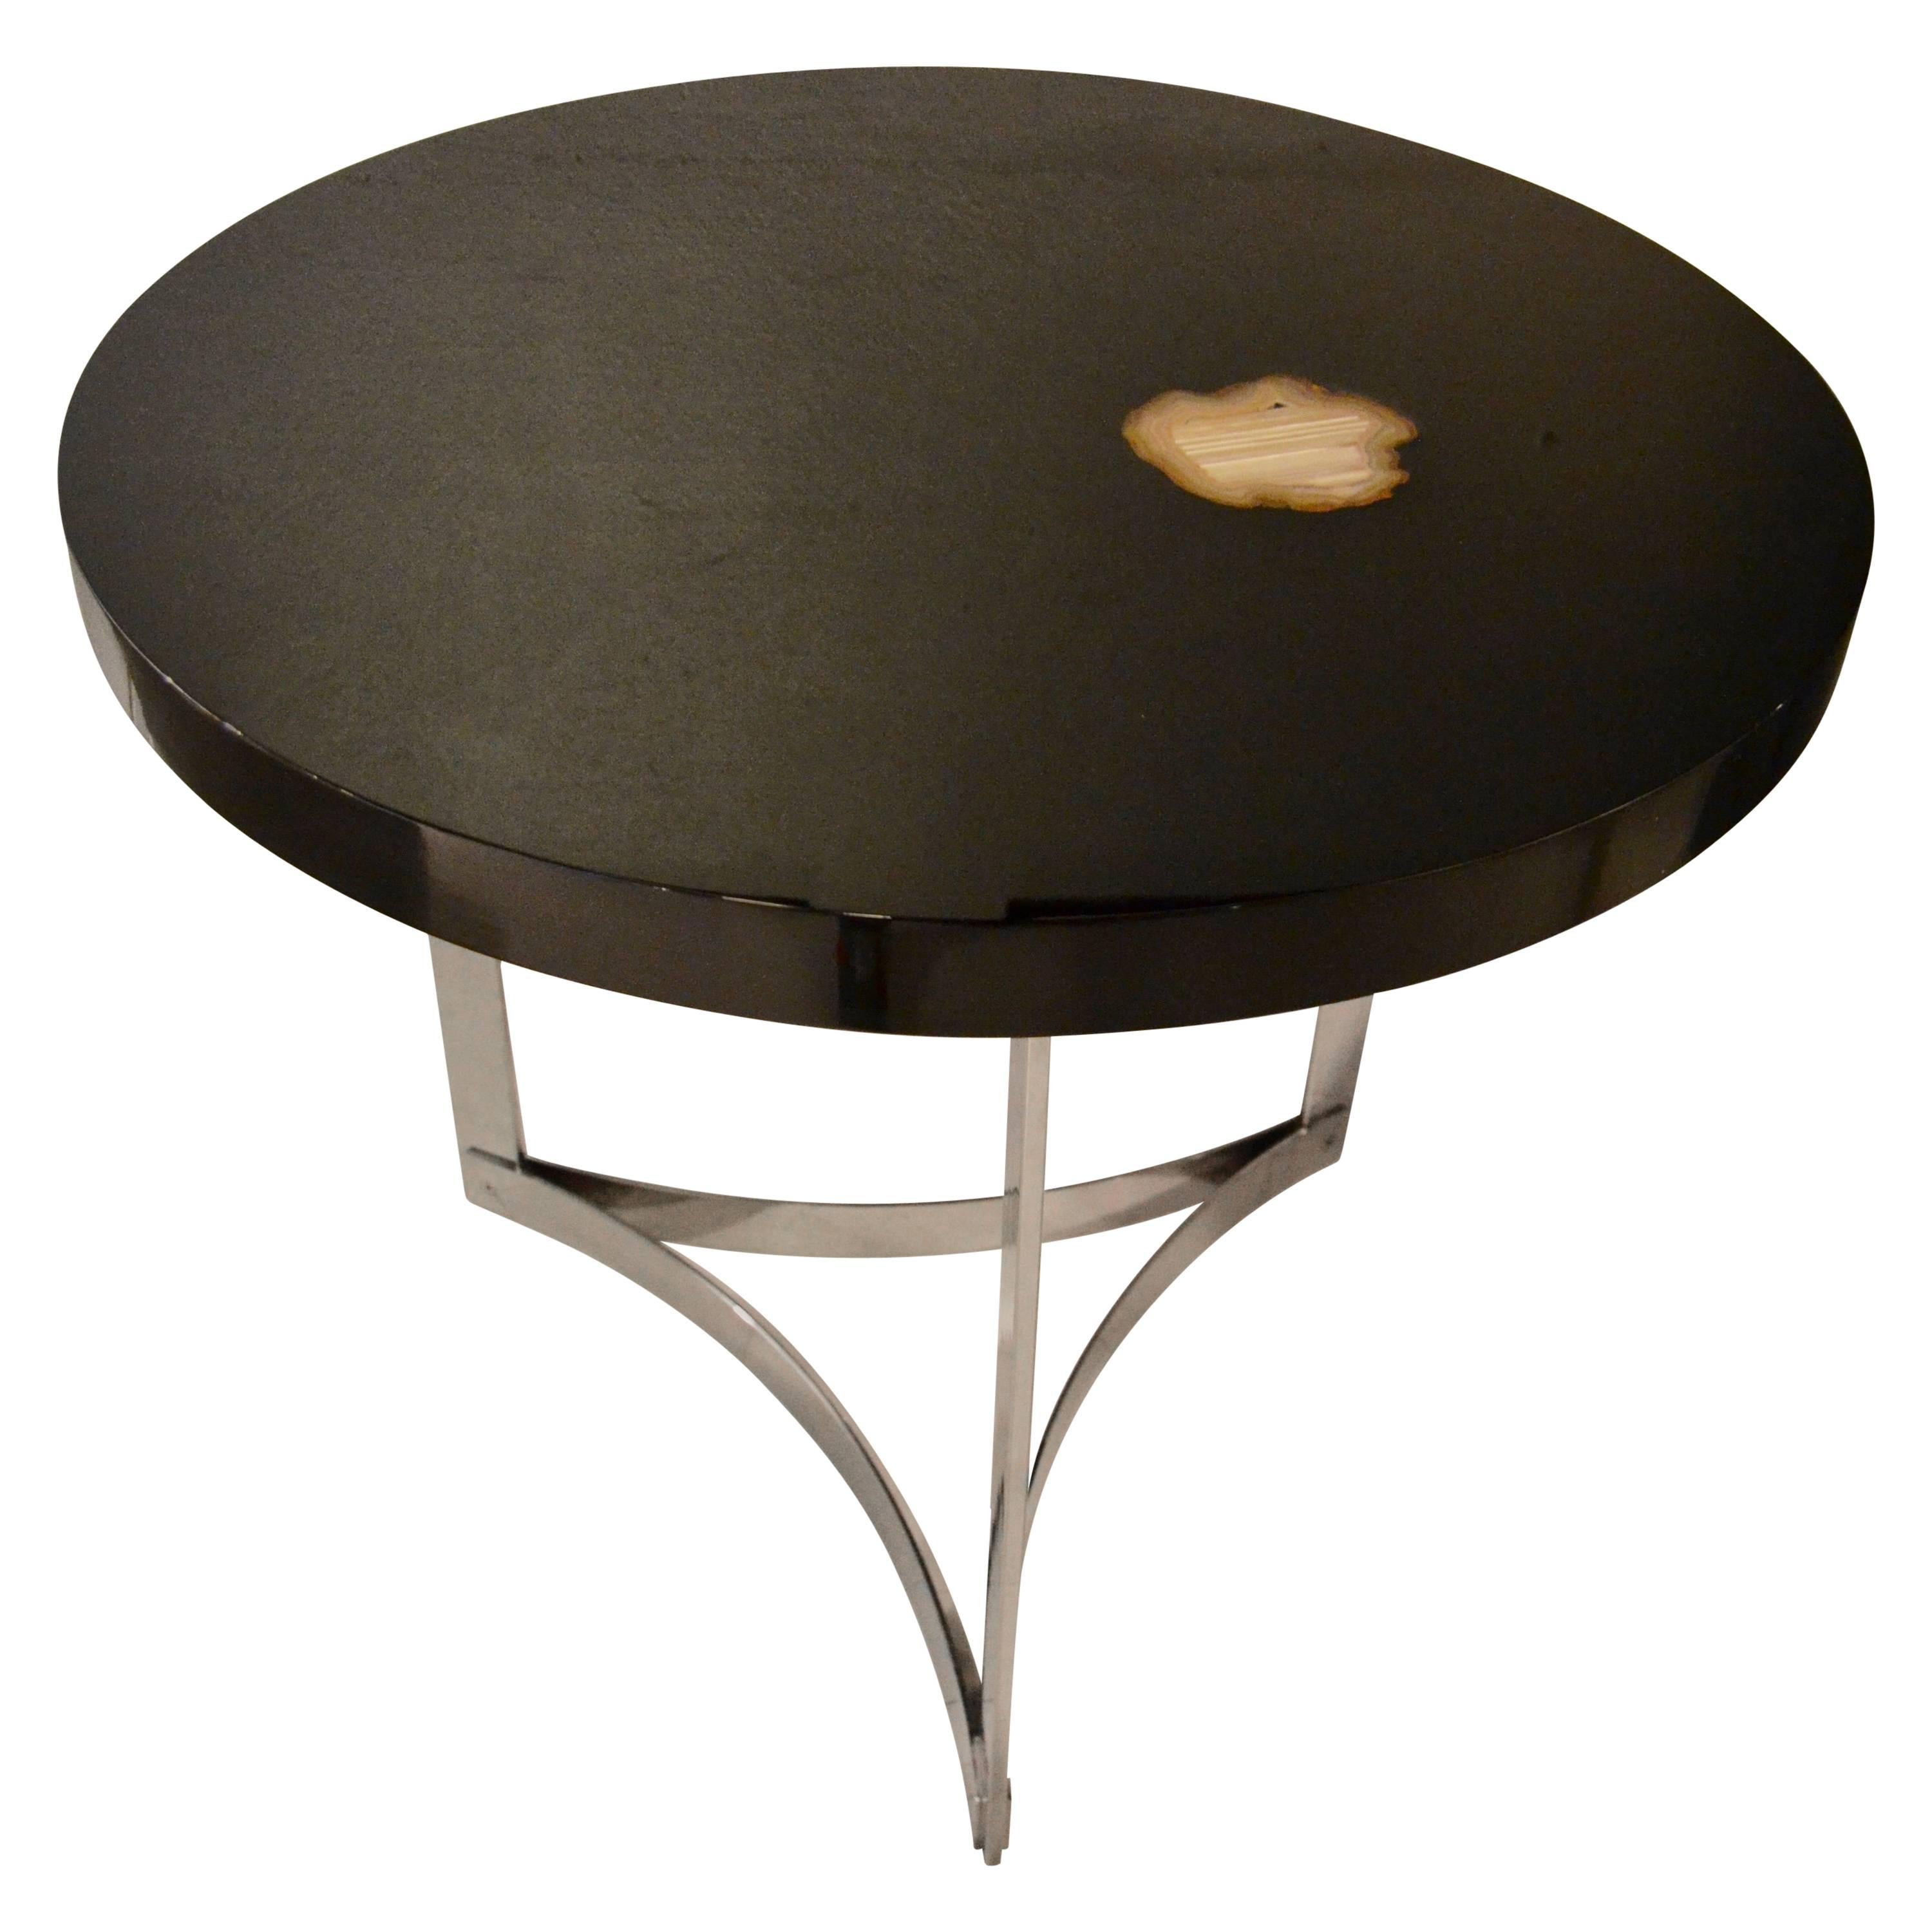 1970s Black Lacquered Table with Agate Inlaid Top